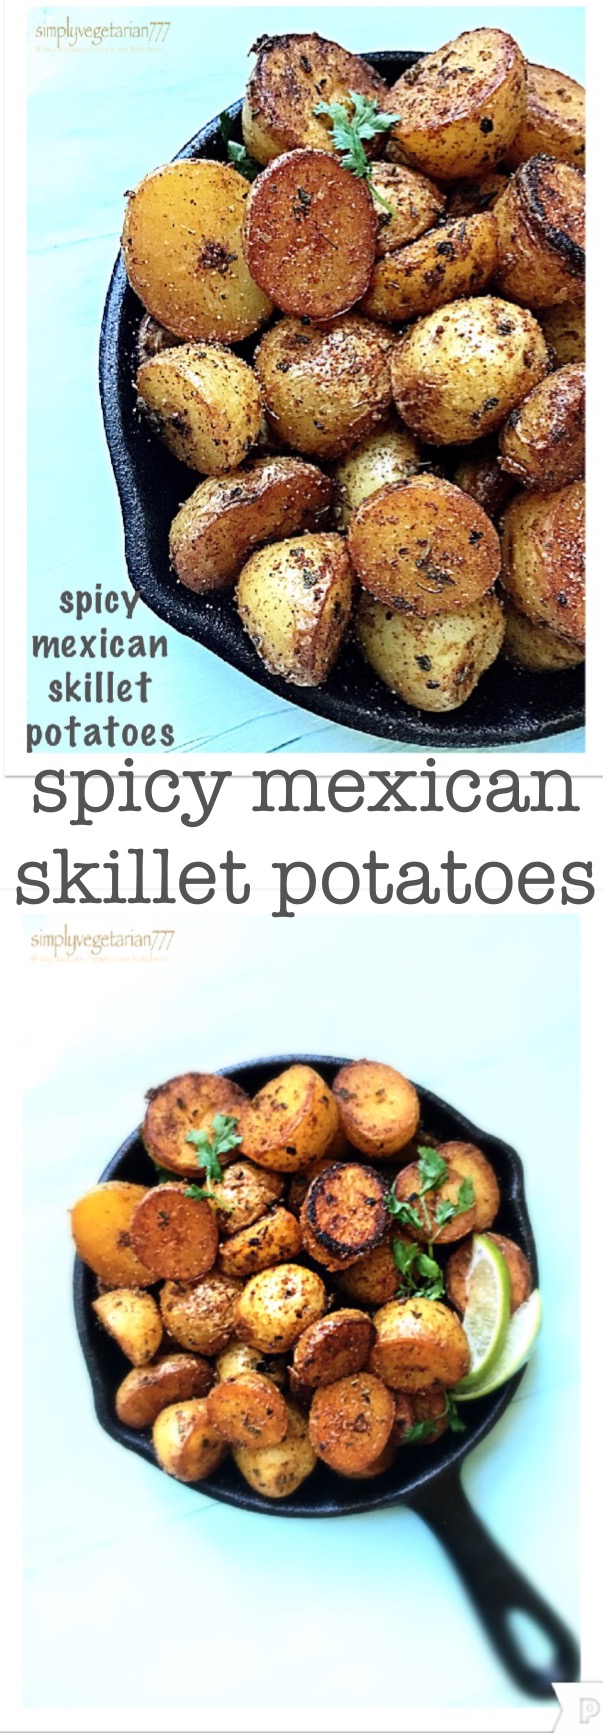 Spicy Mexican Skillet Potatoes - Labor Day celebrations